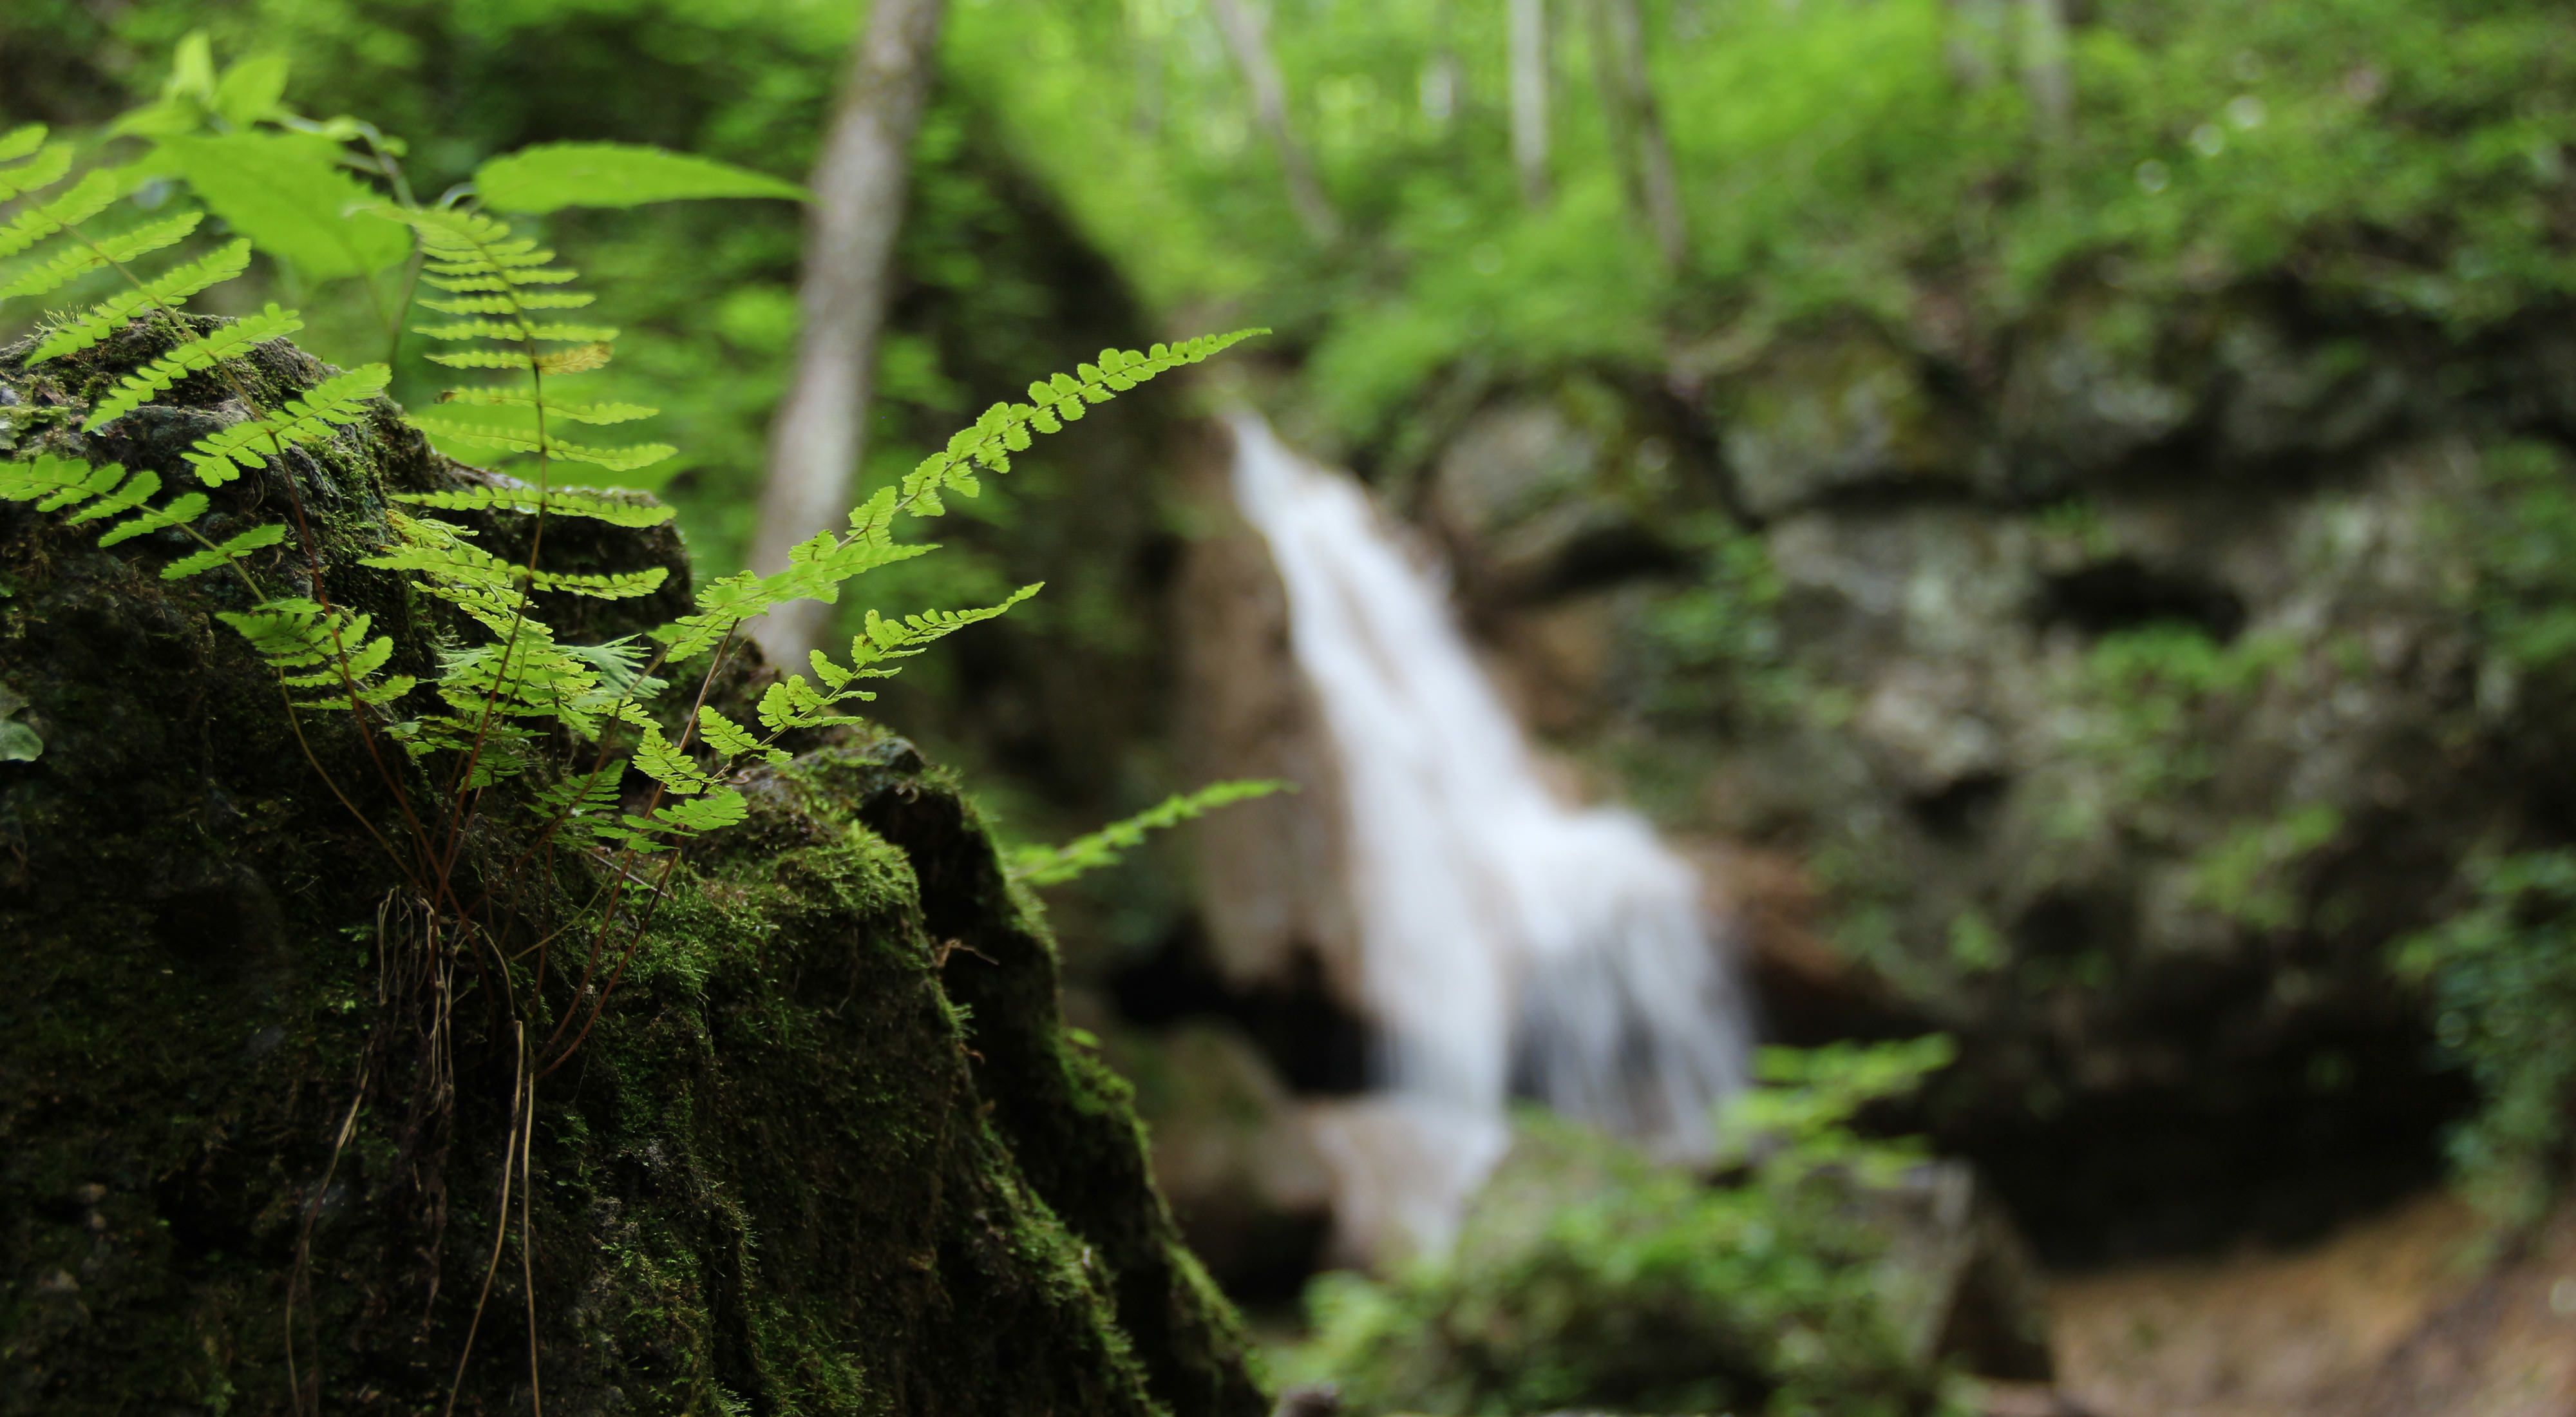 Close up view of small ferns growing out of a clump of earth. The white water of a small waterfall is artfully blurred in the background.